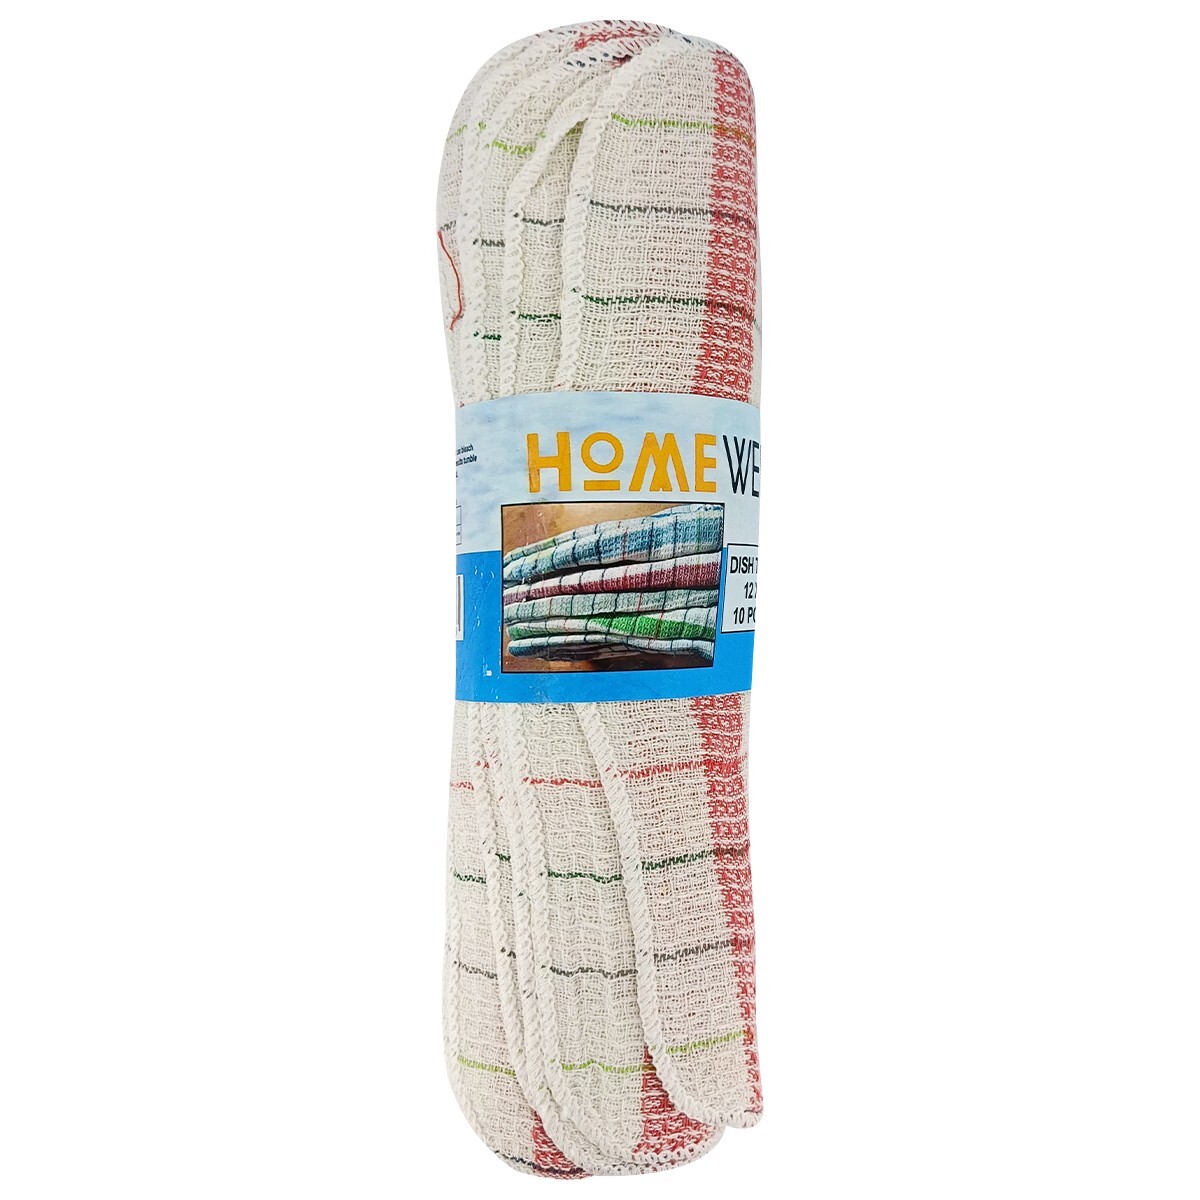 Home Well  Dish Towel  10 piece Set Assorted Colour